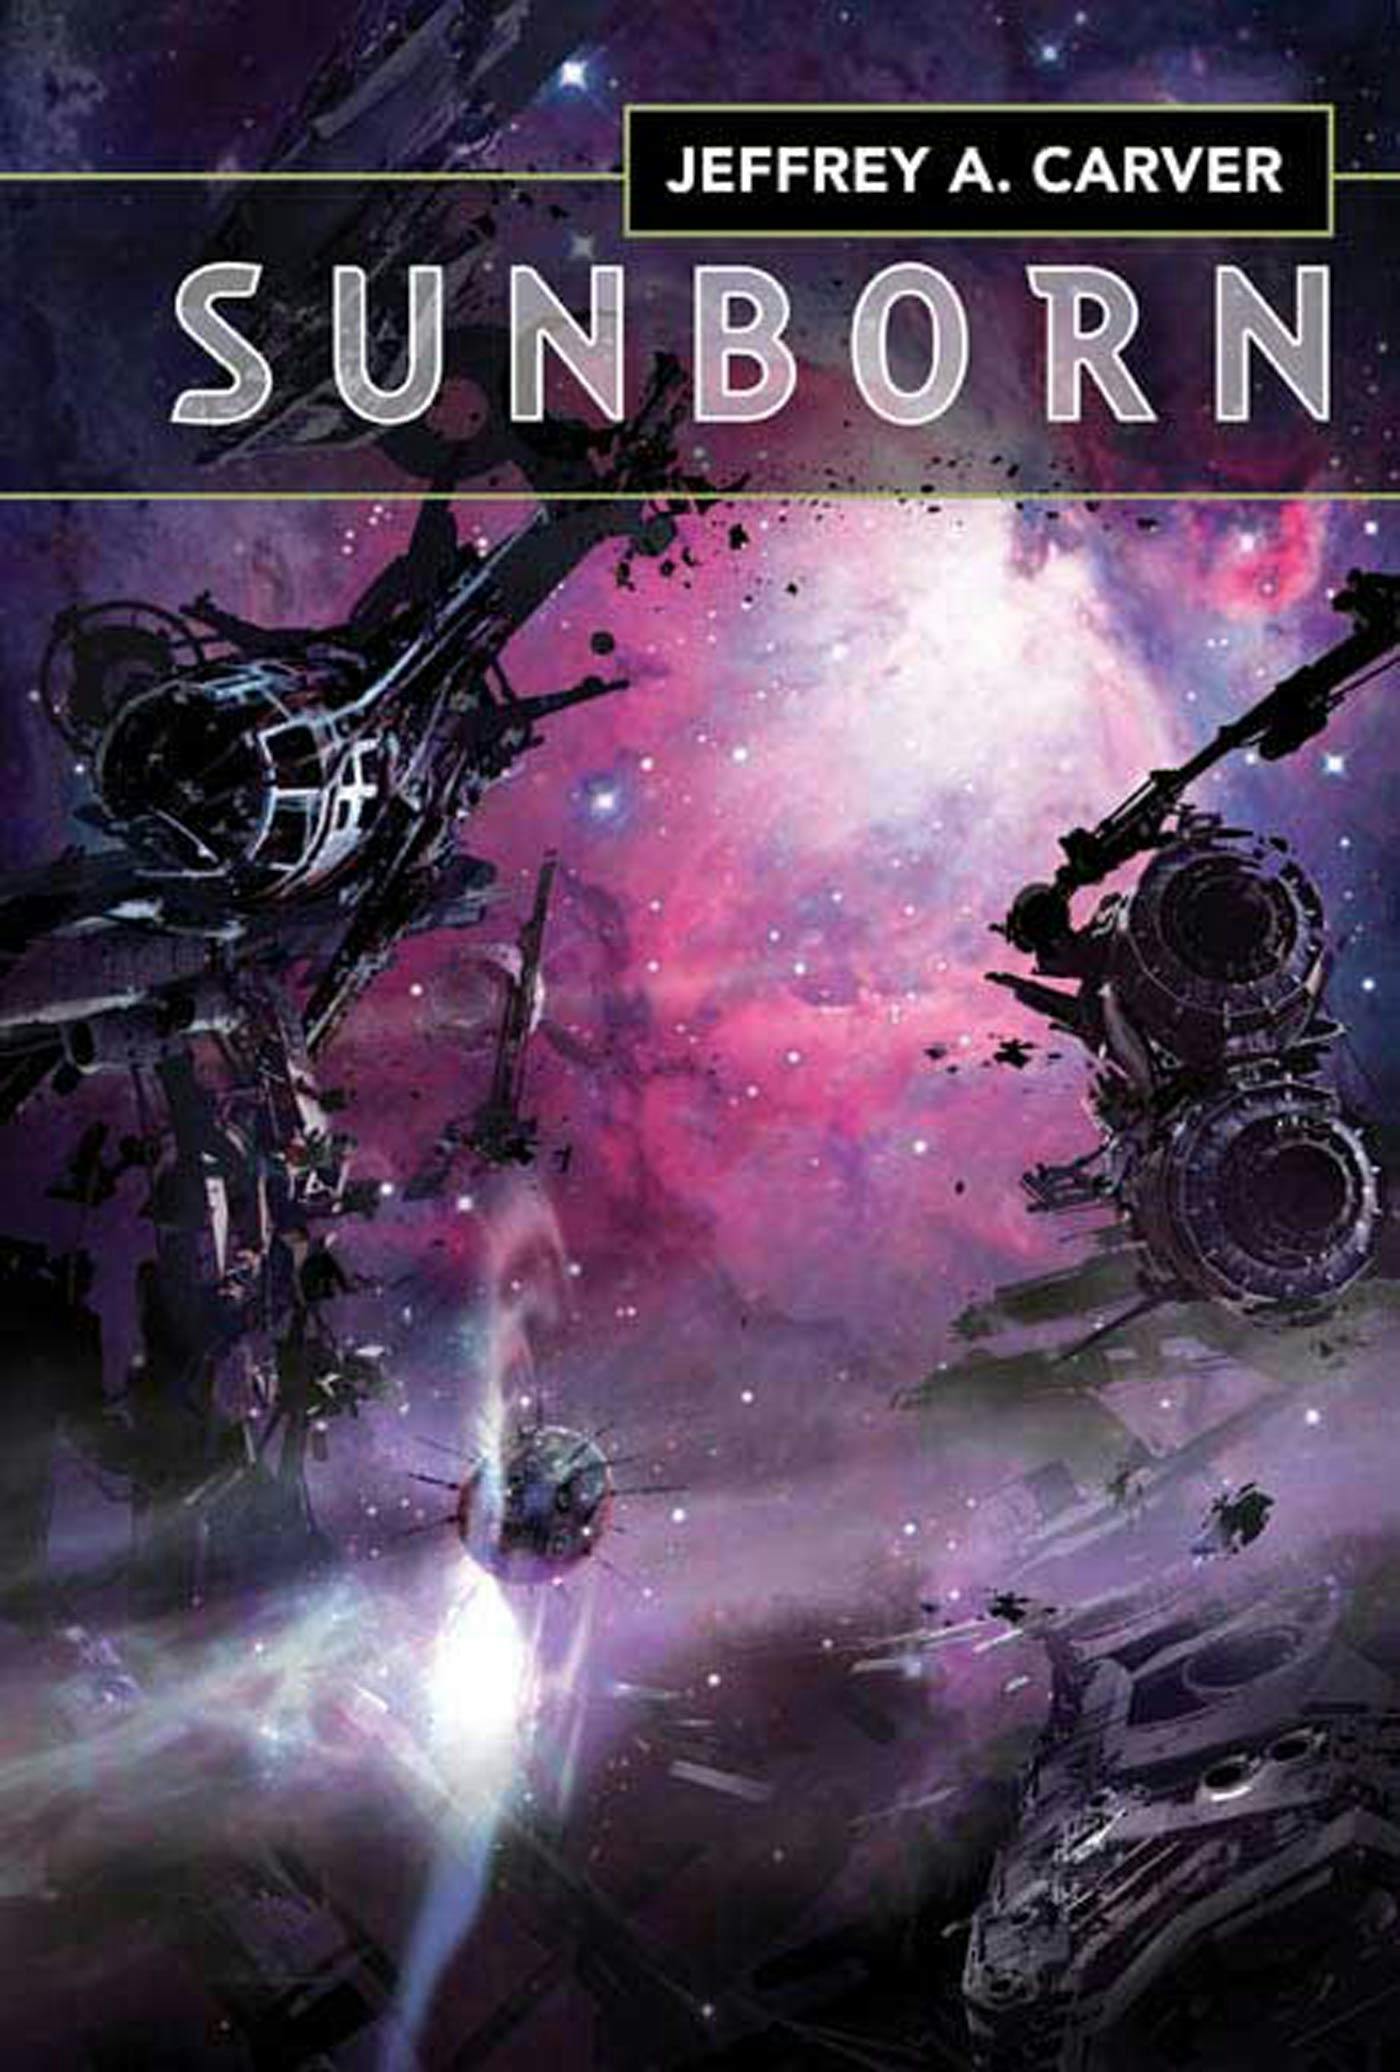 Cover for the book titled as: Sunborn